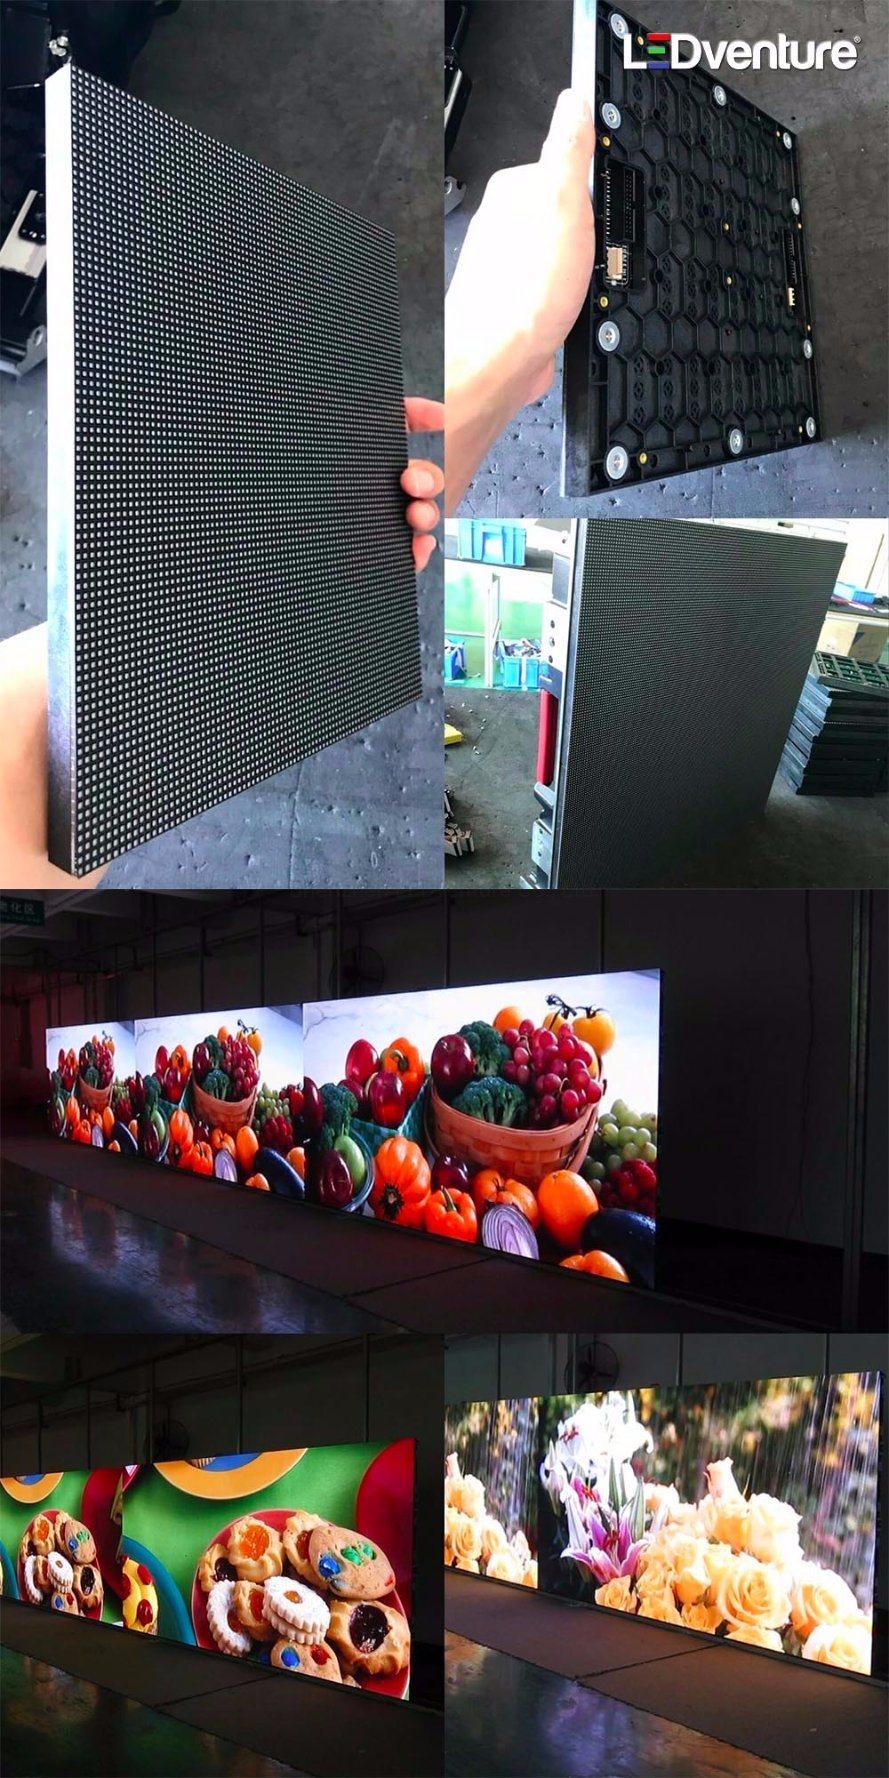 High Definitiong Outdoor Rental P2.6 LED Display Panel for Advertising